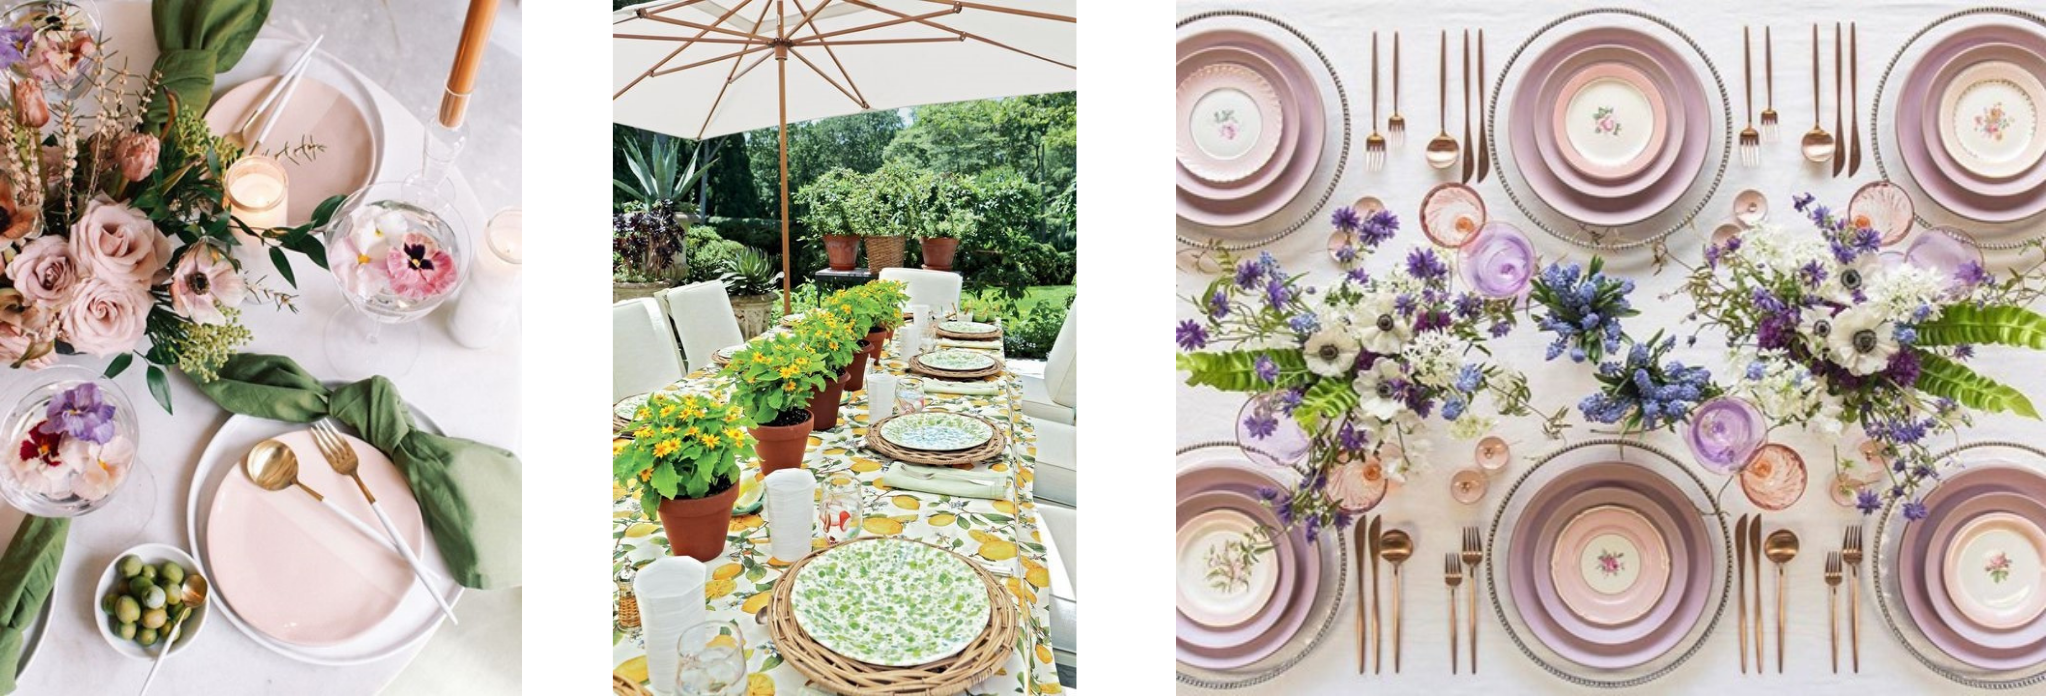 Tablescapes pastel brunch and picnic ideas